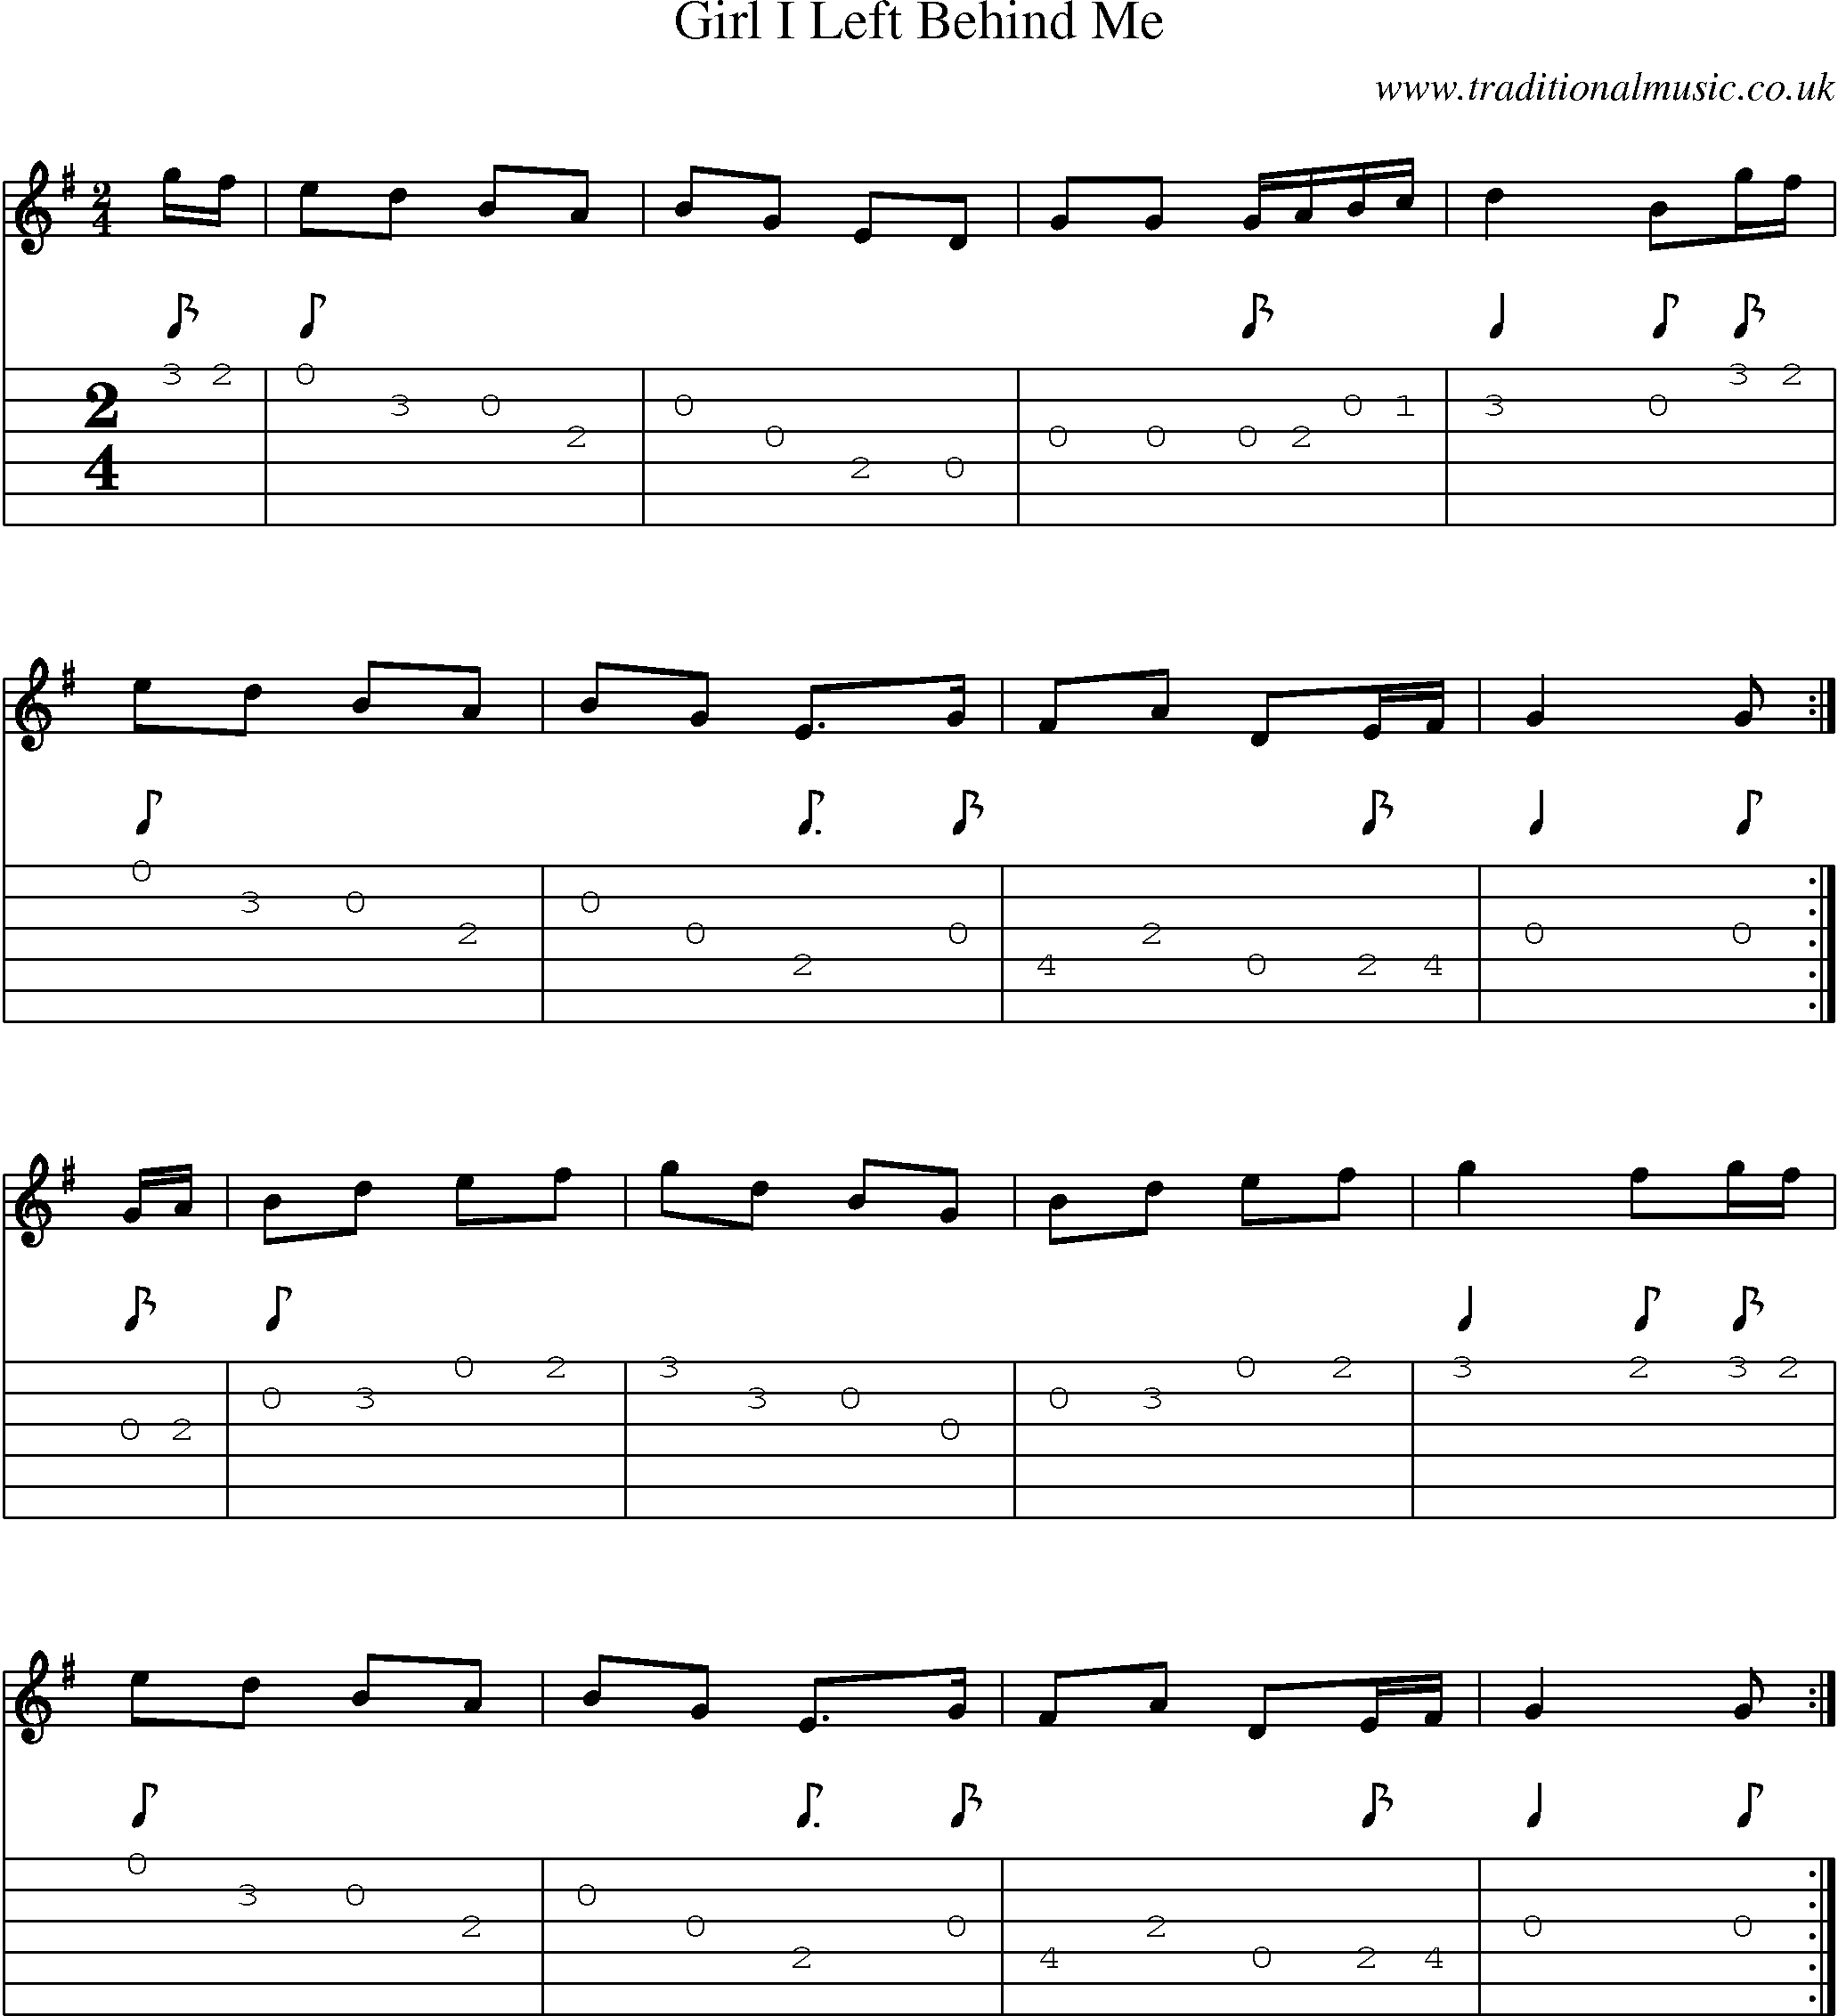 Music Score and Guitar Tabs for Girl I Left Behind Me